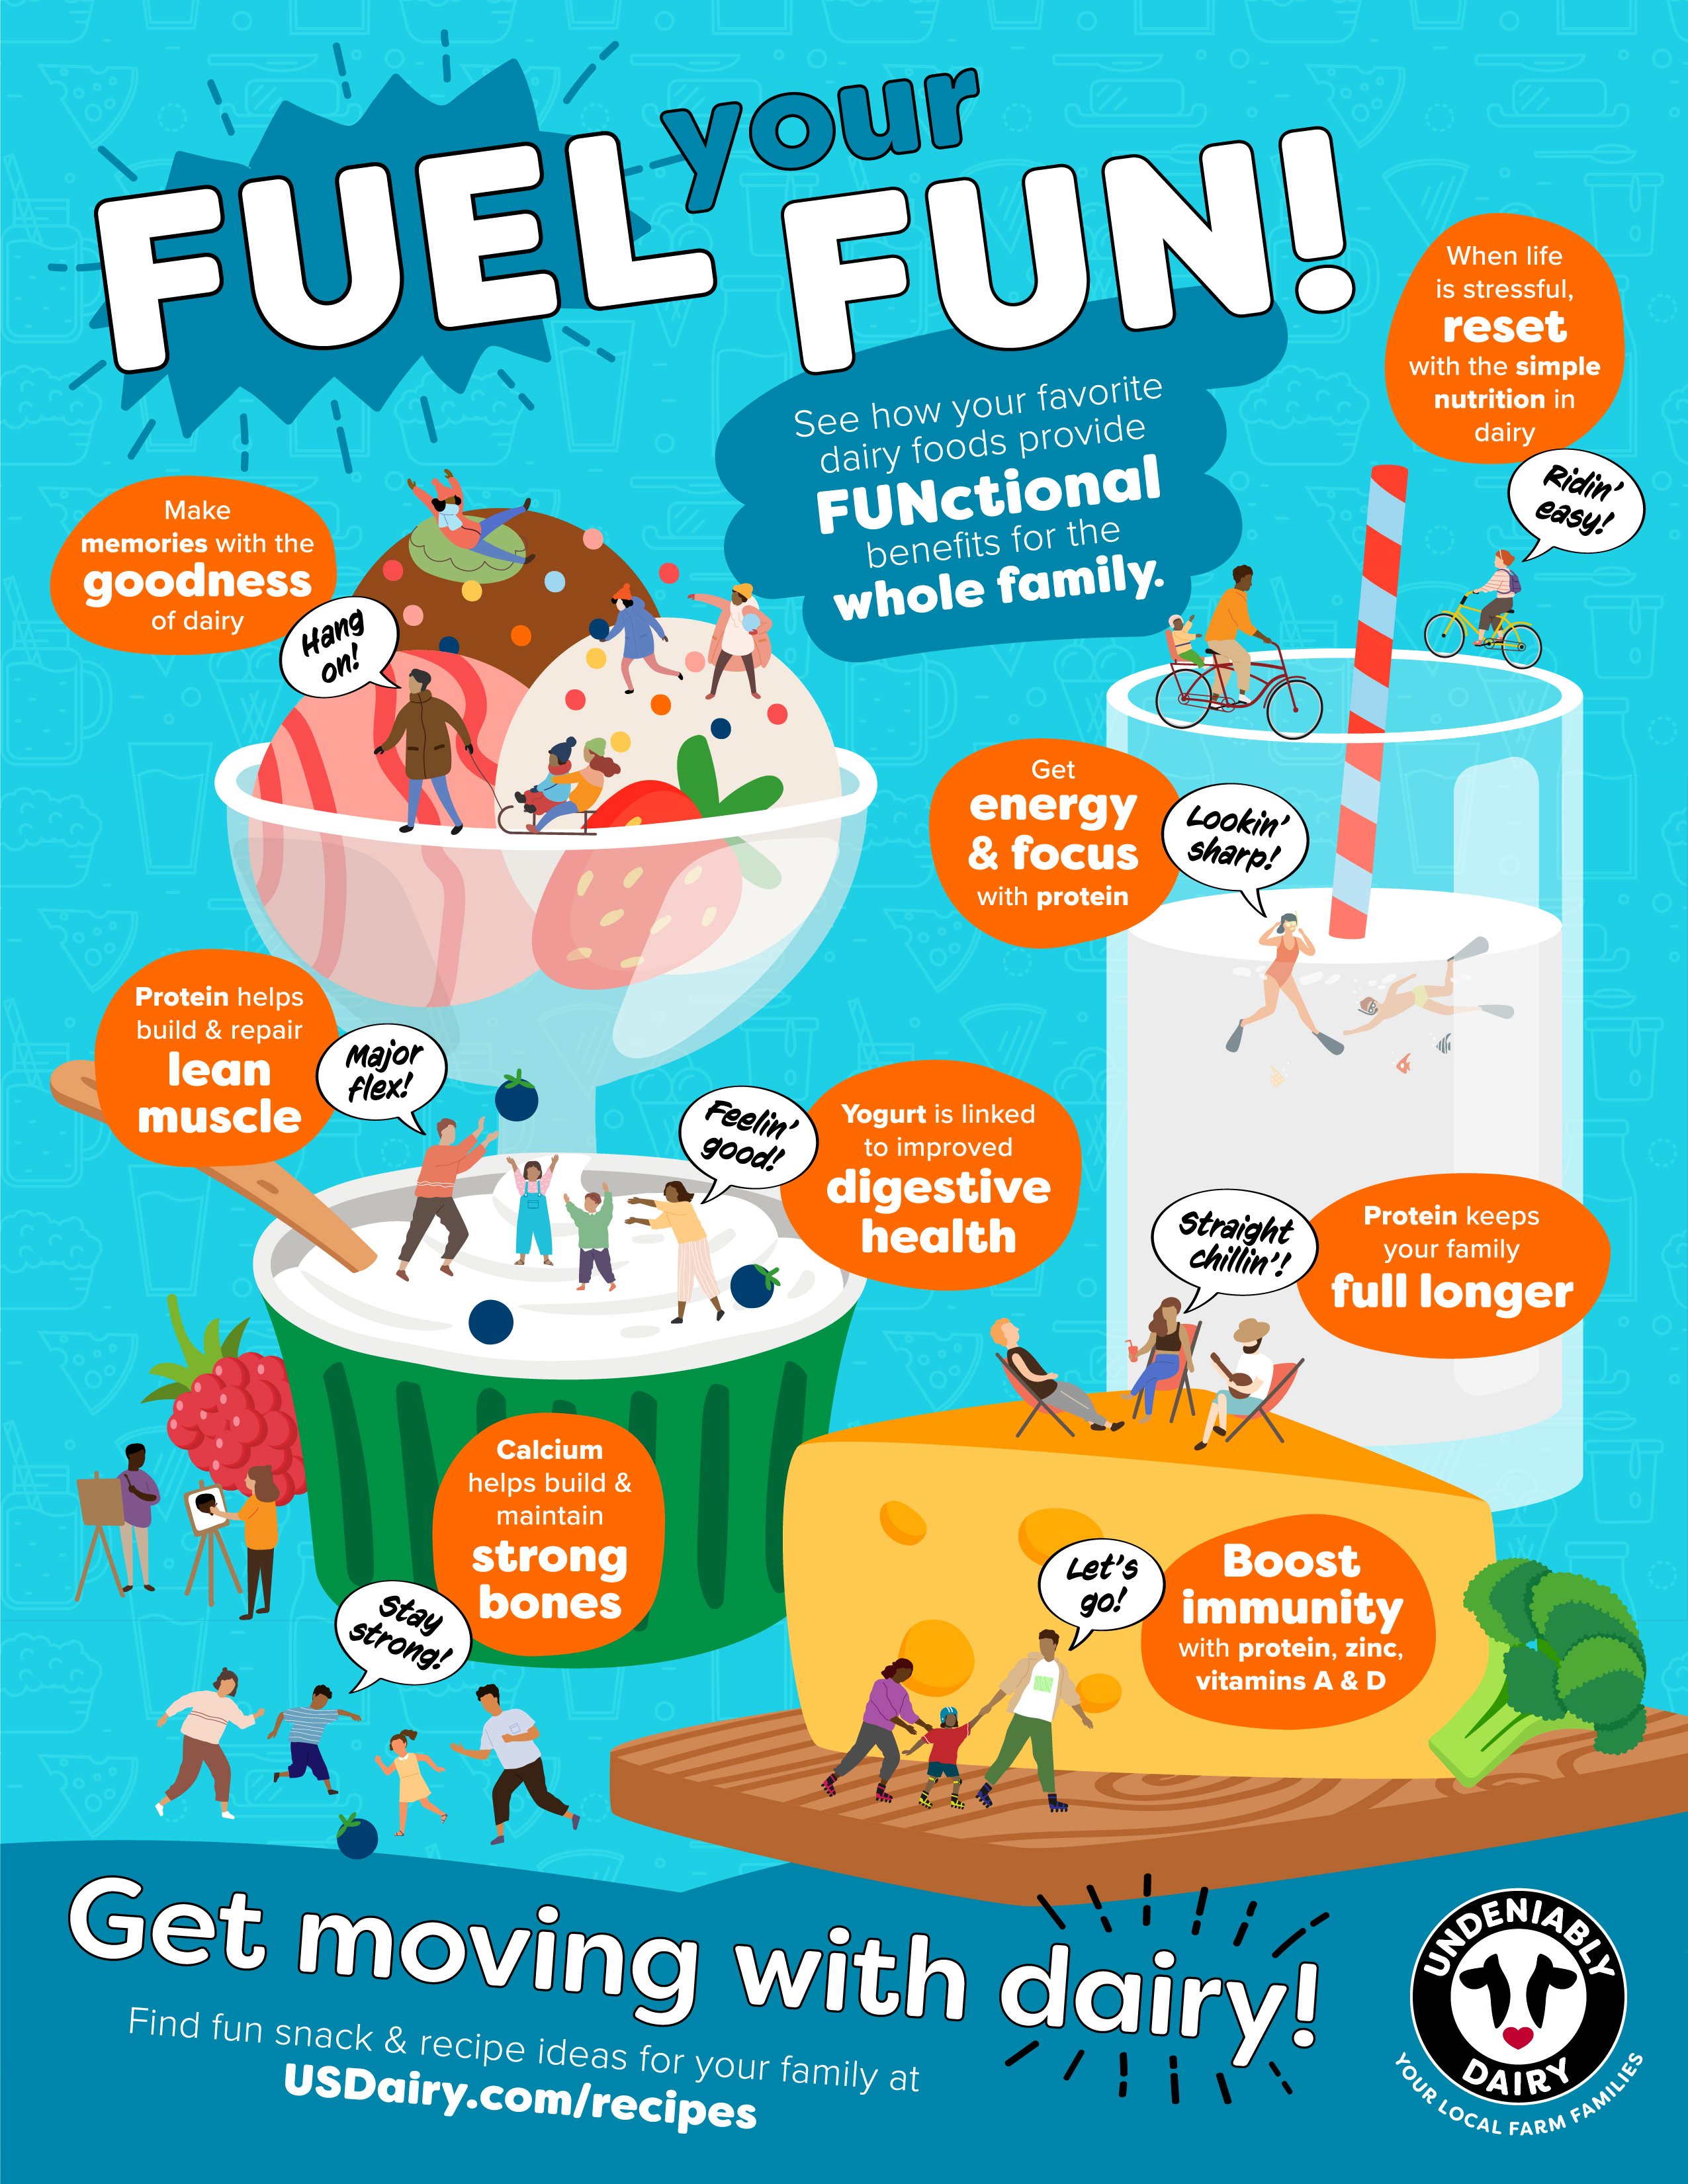 Fuel Your Fun: See how your favorite dairy food provide FUNctional benefits for the whole family. Make memories with the goodness of dairy. Get energy and focus with protein. Protein helps build and repair lean muscle. Yogurt is linked to improved digestive health. Calcium helps build and maintain strong bones. Boost immunity with protein, zinc and vitamins A and D. So Get moving with Dairy!